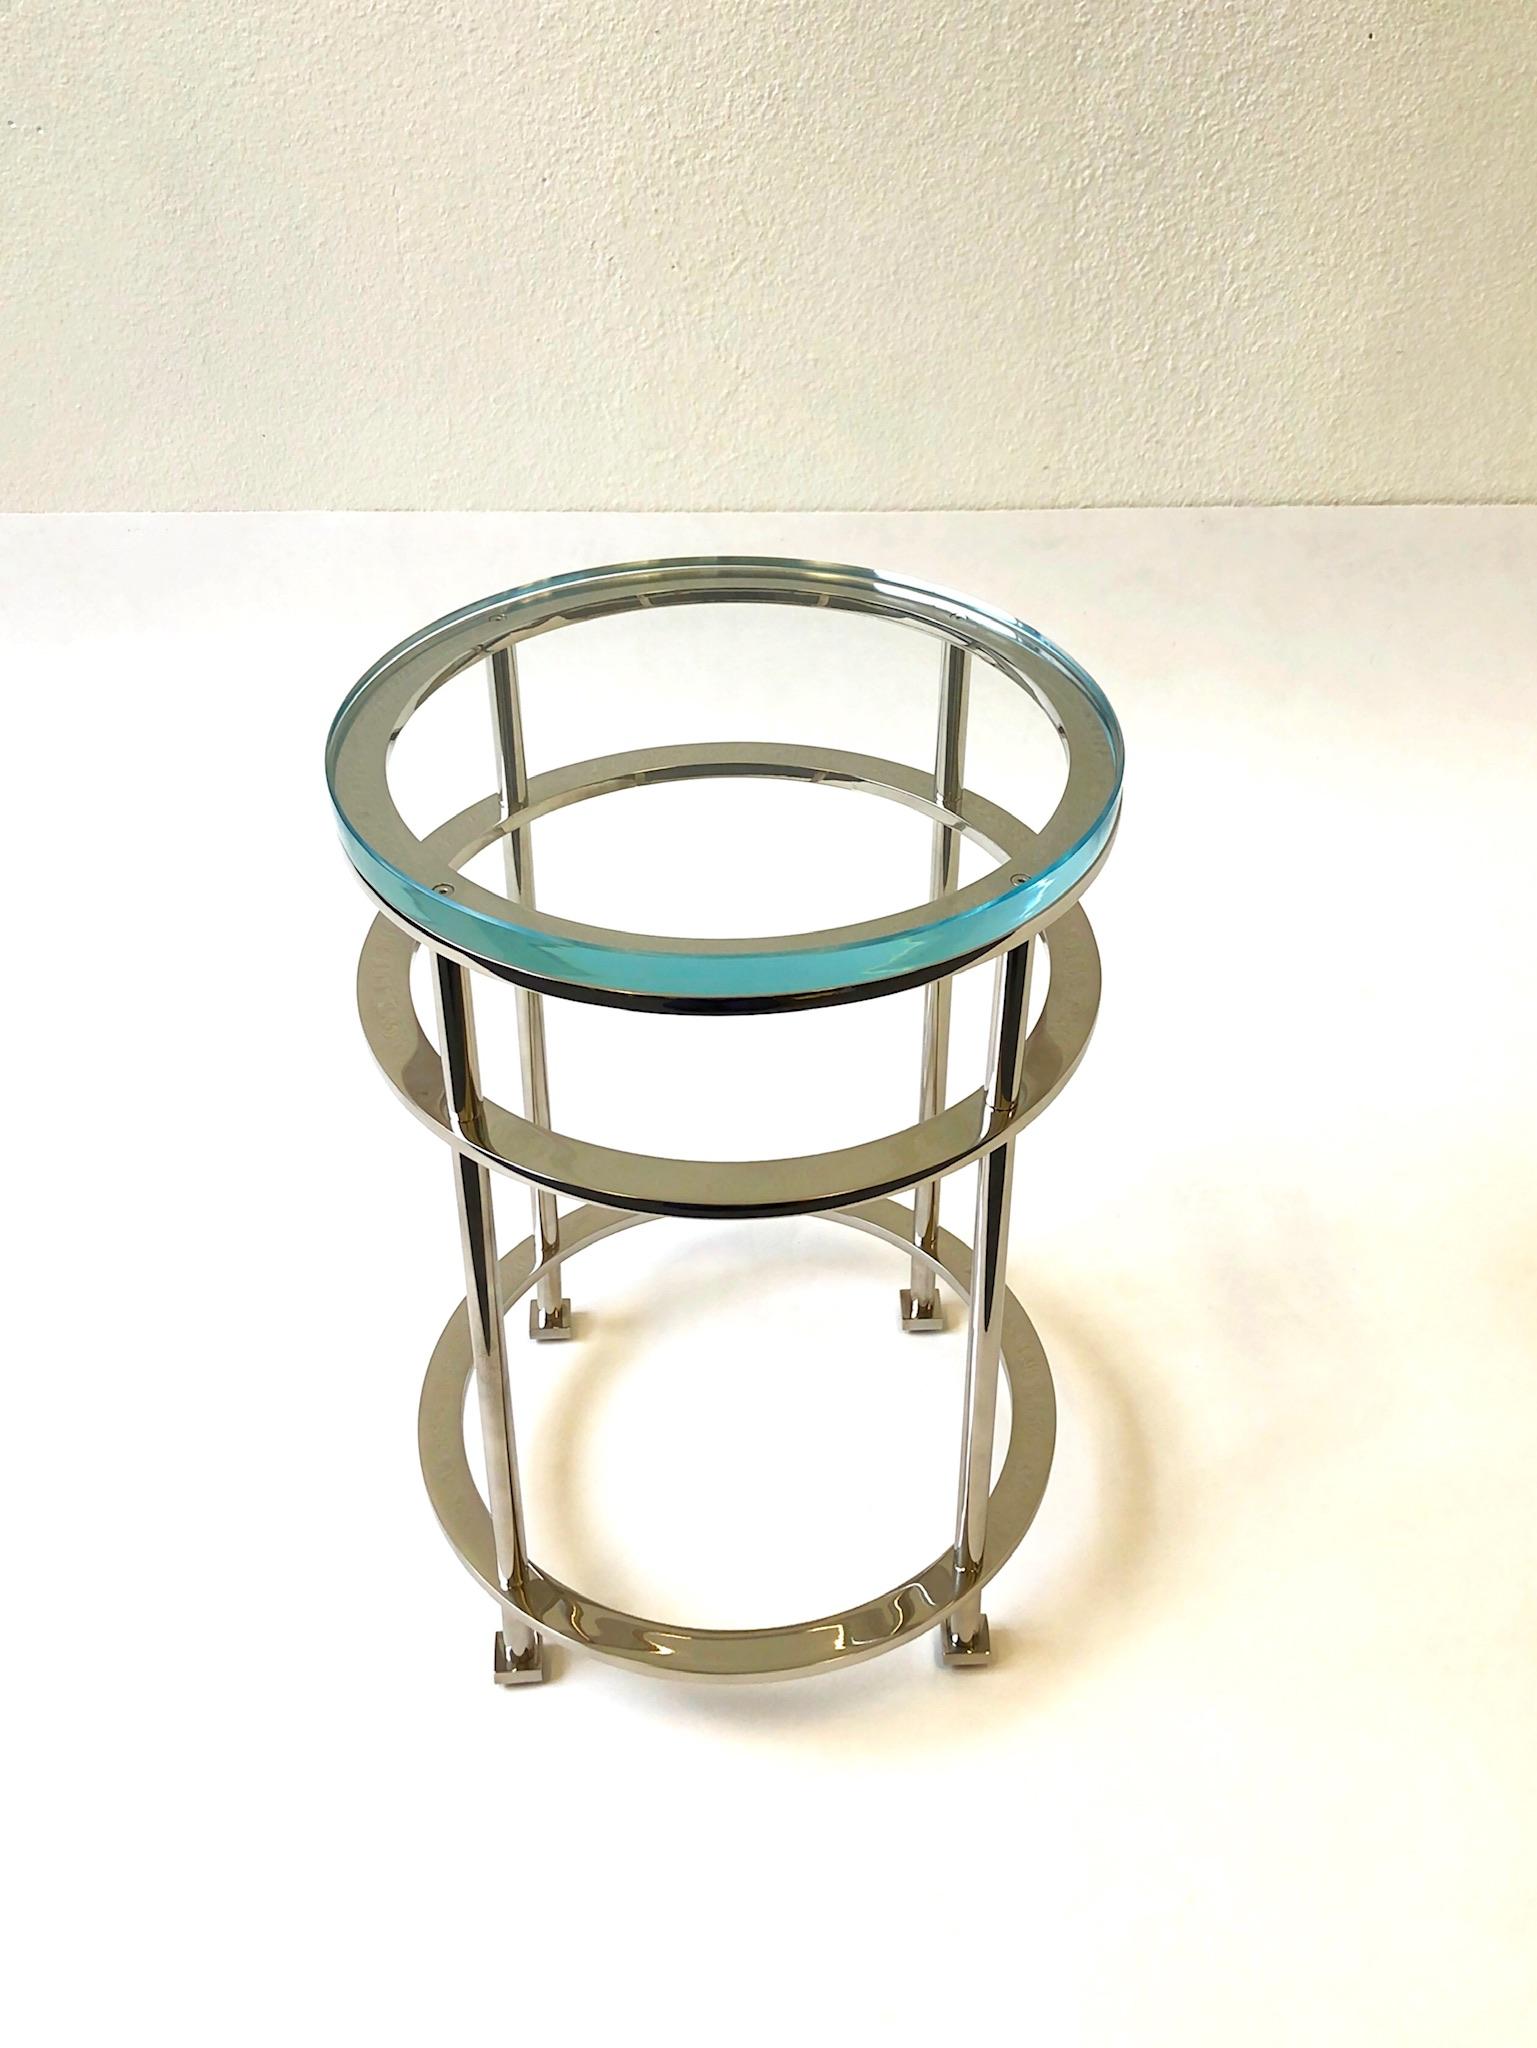 Late 20th Century Pair of Nickel and Lucite Side Tables by Jean Michel Wilmotte for Mirak